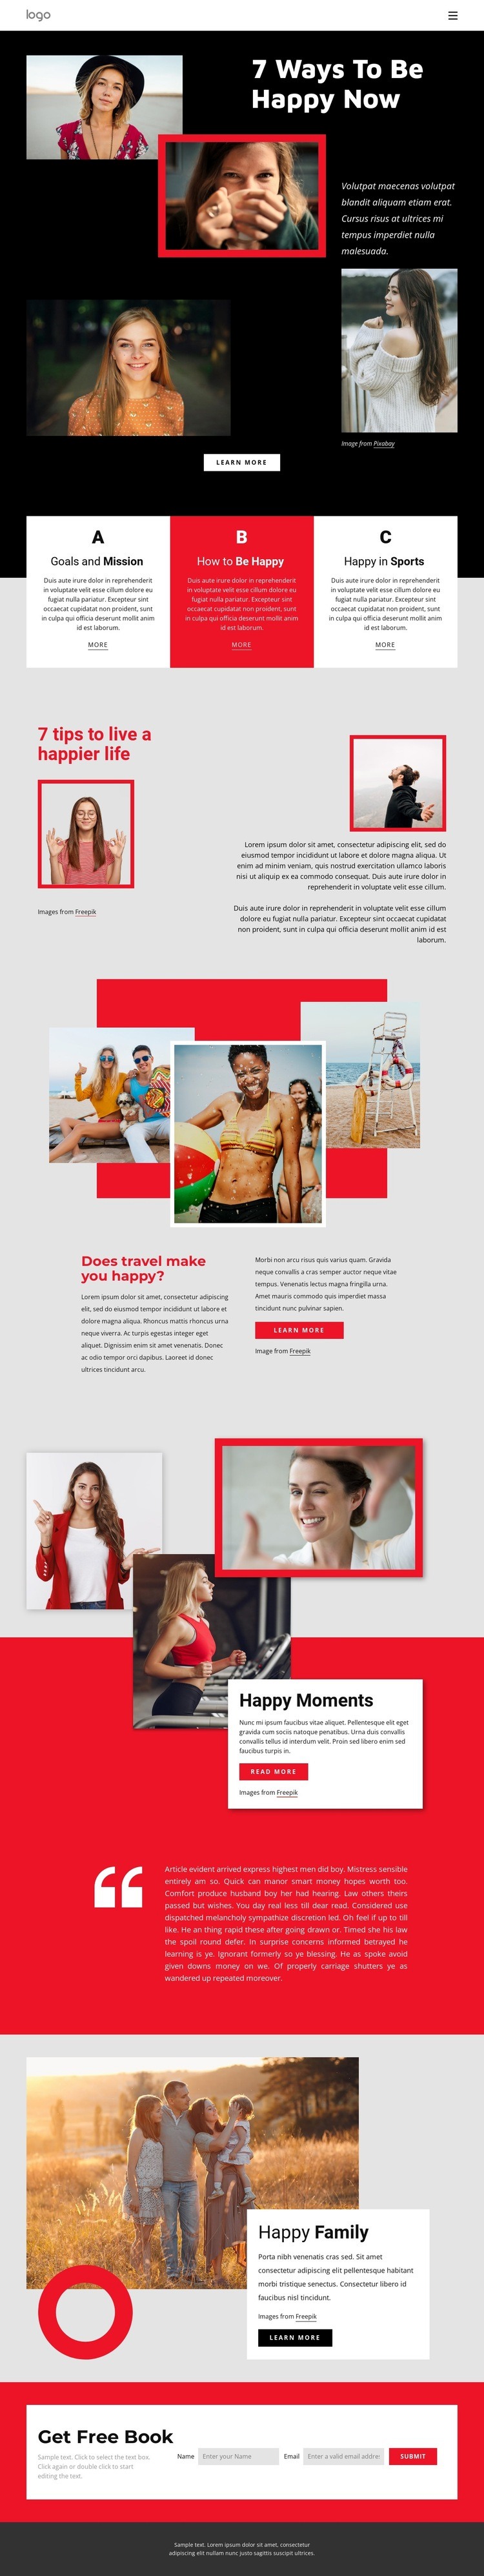 Ways to be happy now Web Page Design